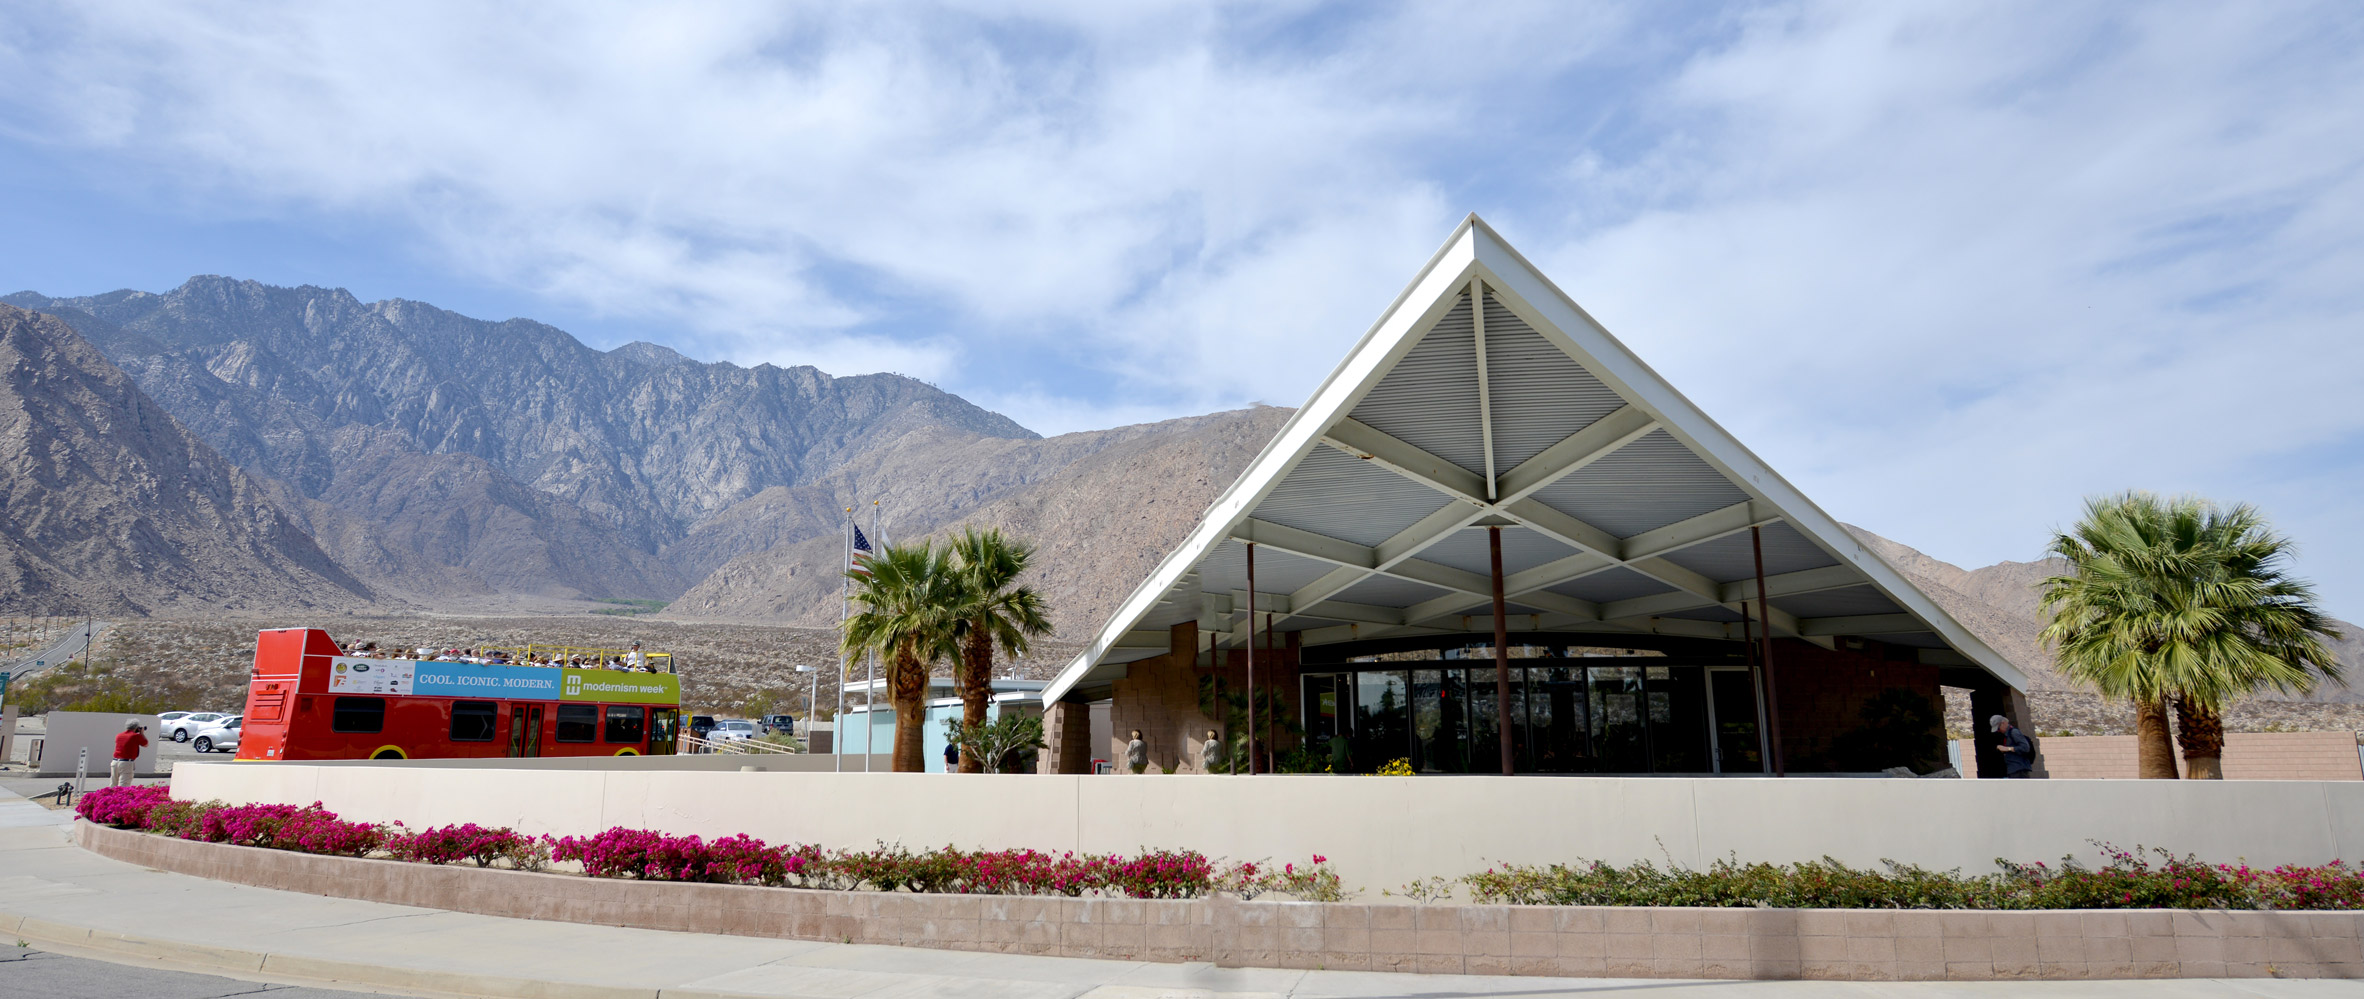 Tramway Gas Station by Frey and Chambers is a modernist gatehouse for Palm Springs